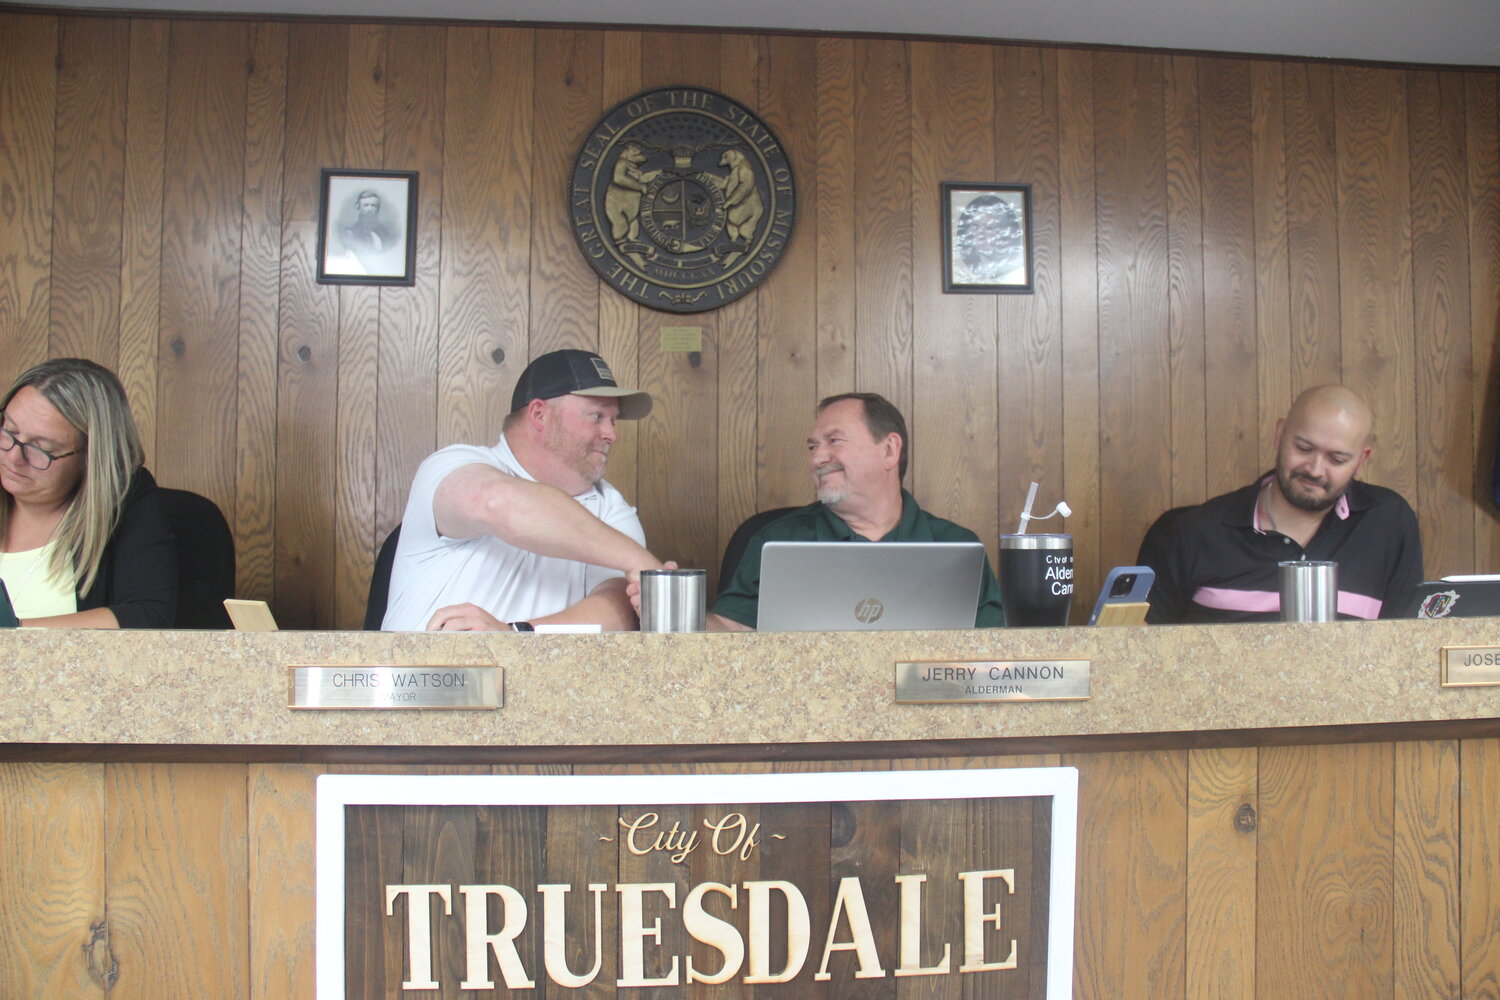 Outgoing Truesdale Mayor Chris Watson shakes hands with newly-appointed Mayor Jerry Cannon at the end of the June 28 board of aldermen meeting.